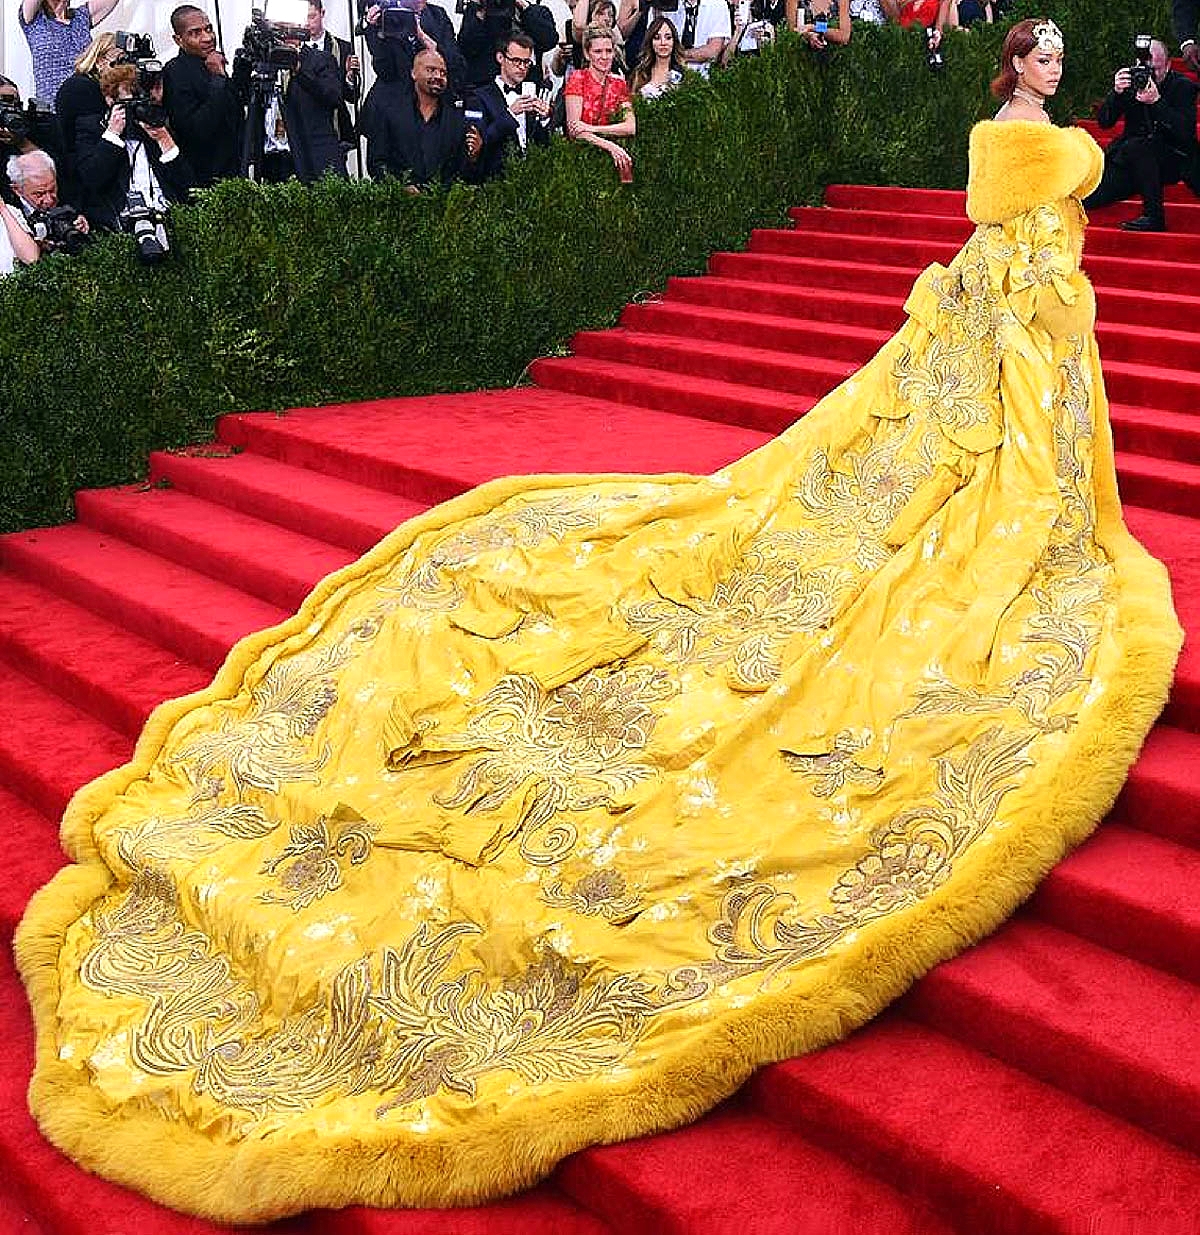 Met Gala and Exhibition: “China: Through the Looking Glass